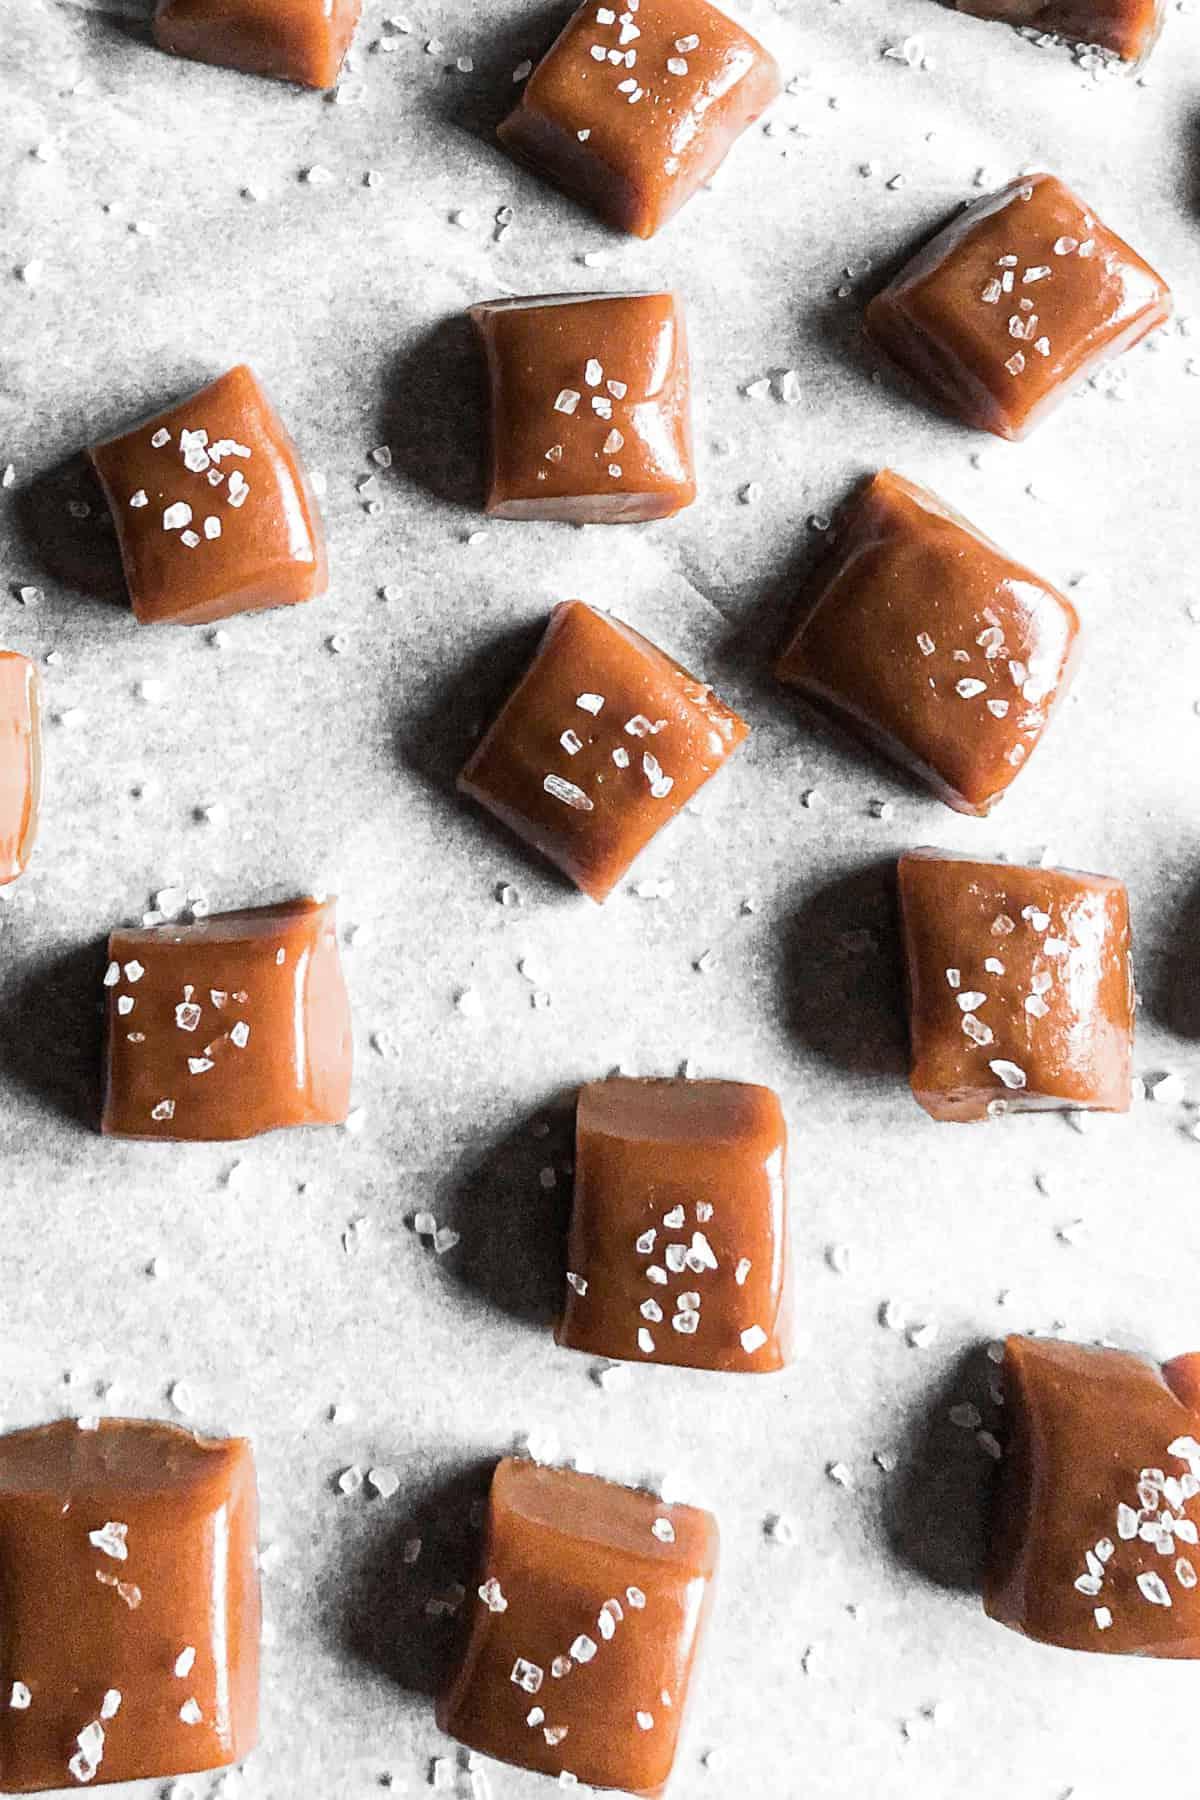 Whiskey salted caramels are a great dessert to go with spaghetti.